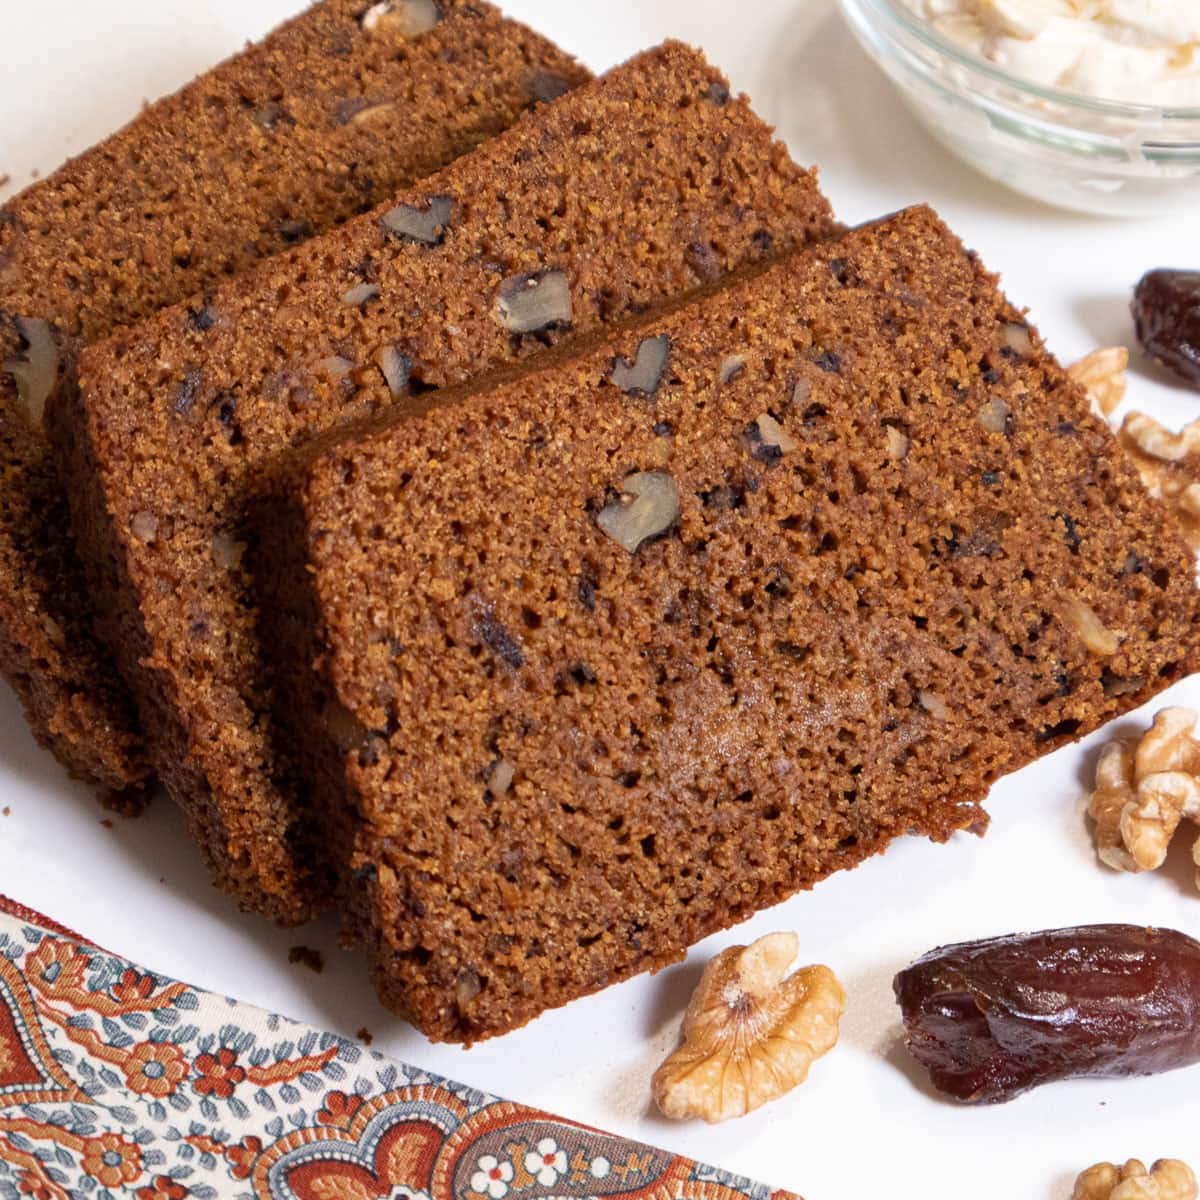 Slices of Date Nut Bread on a plate with walnut halves and dates around it.  